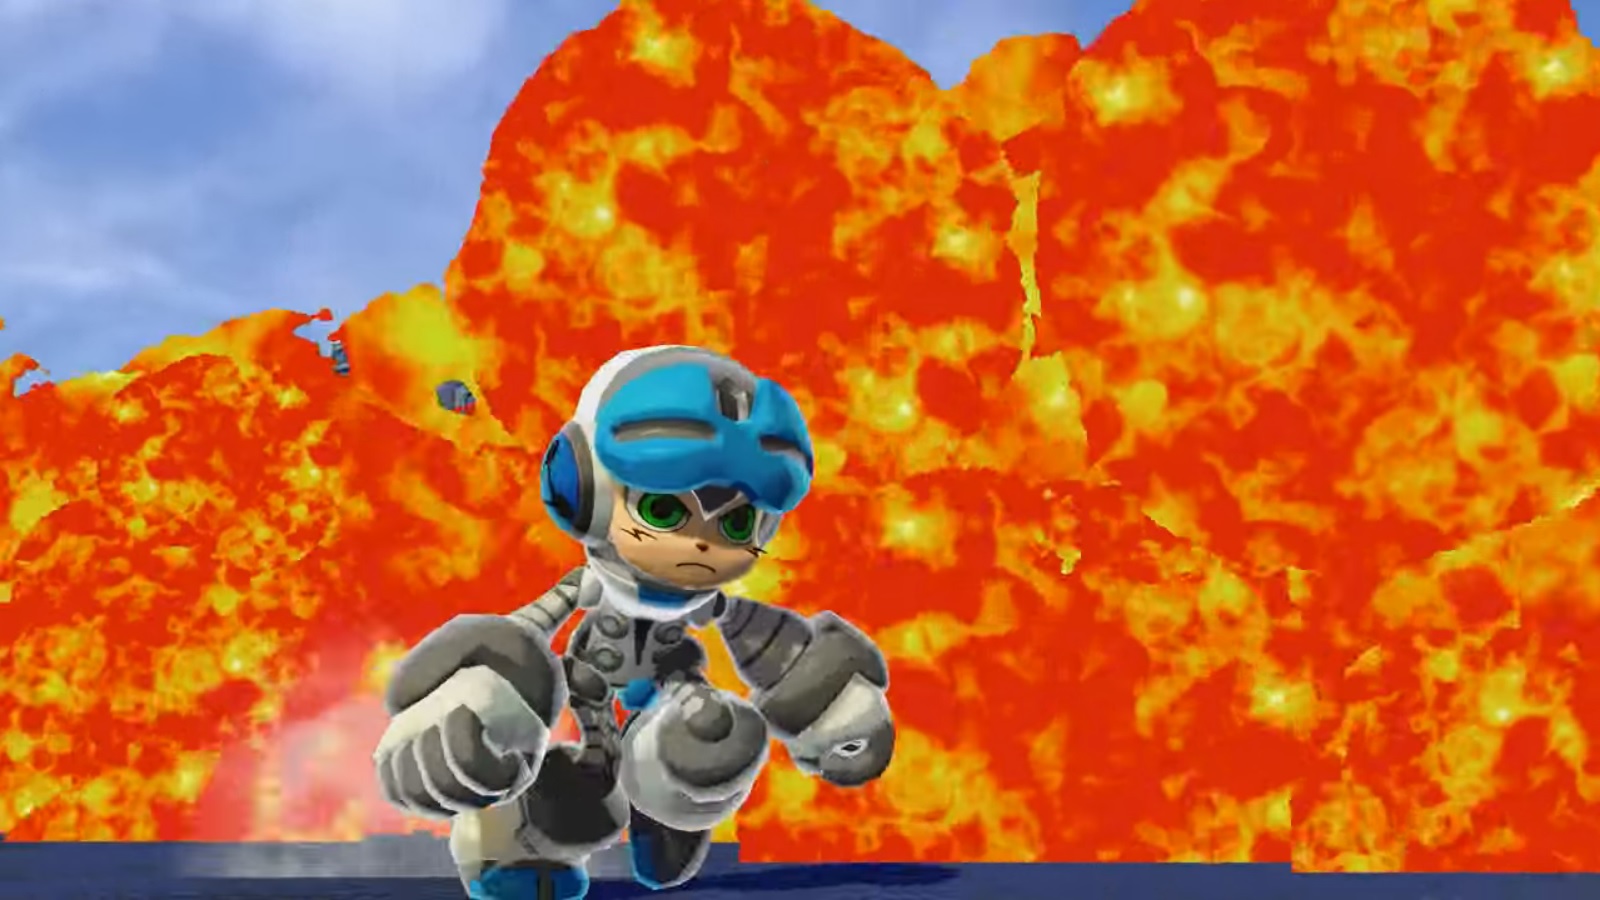 download free mighty no 9 metacritic